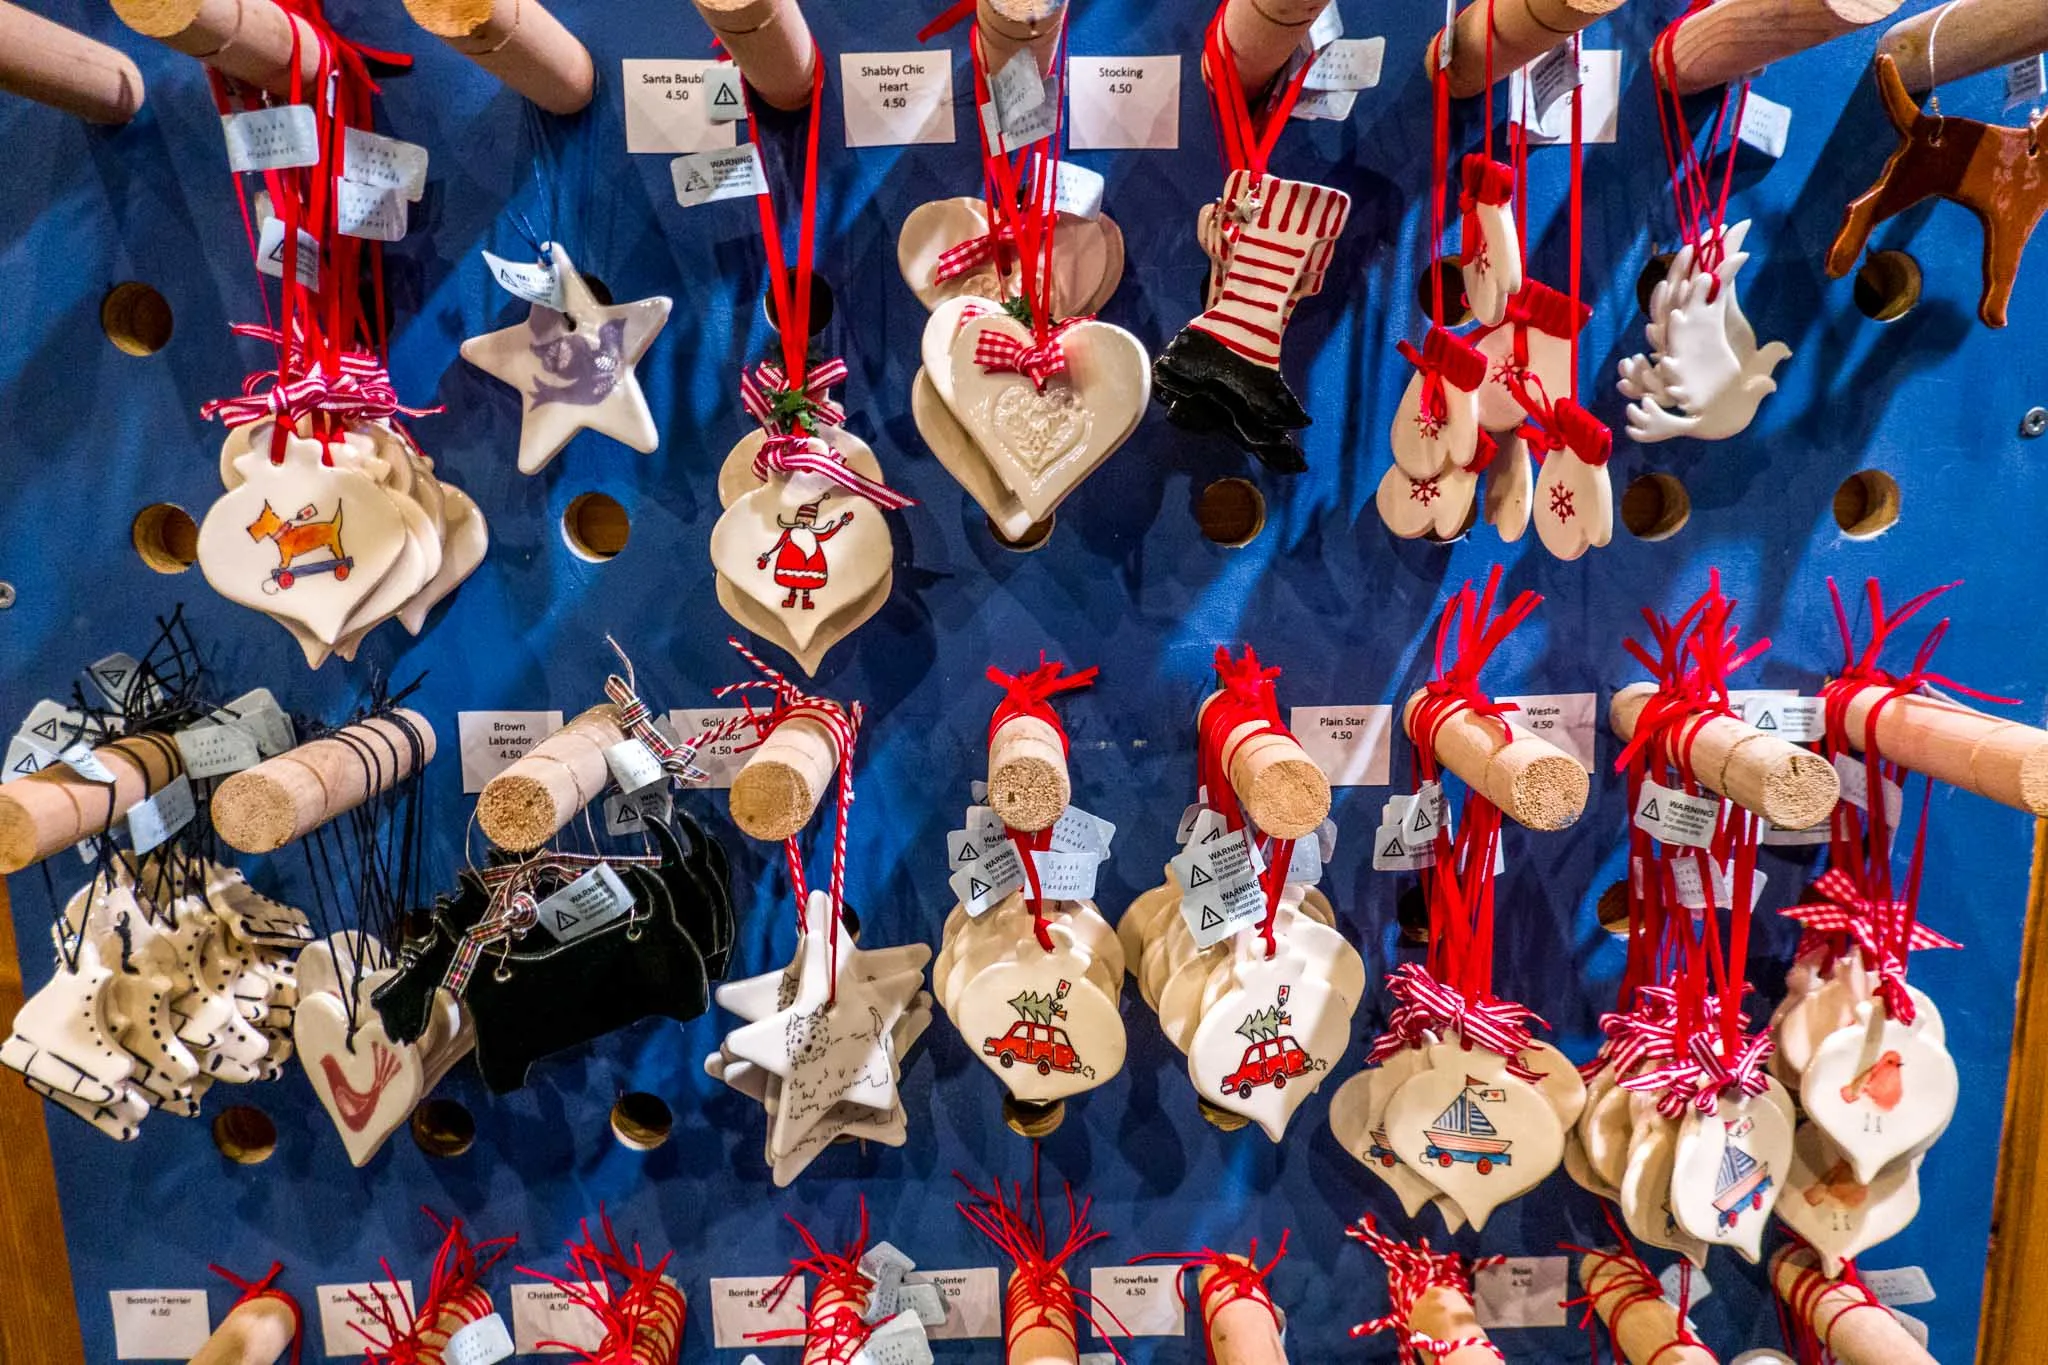 Handmade ornaments for sale at the market